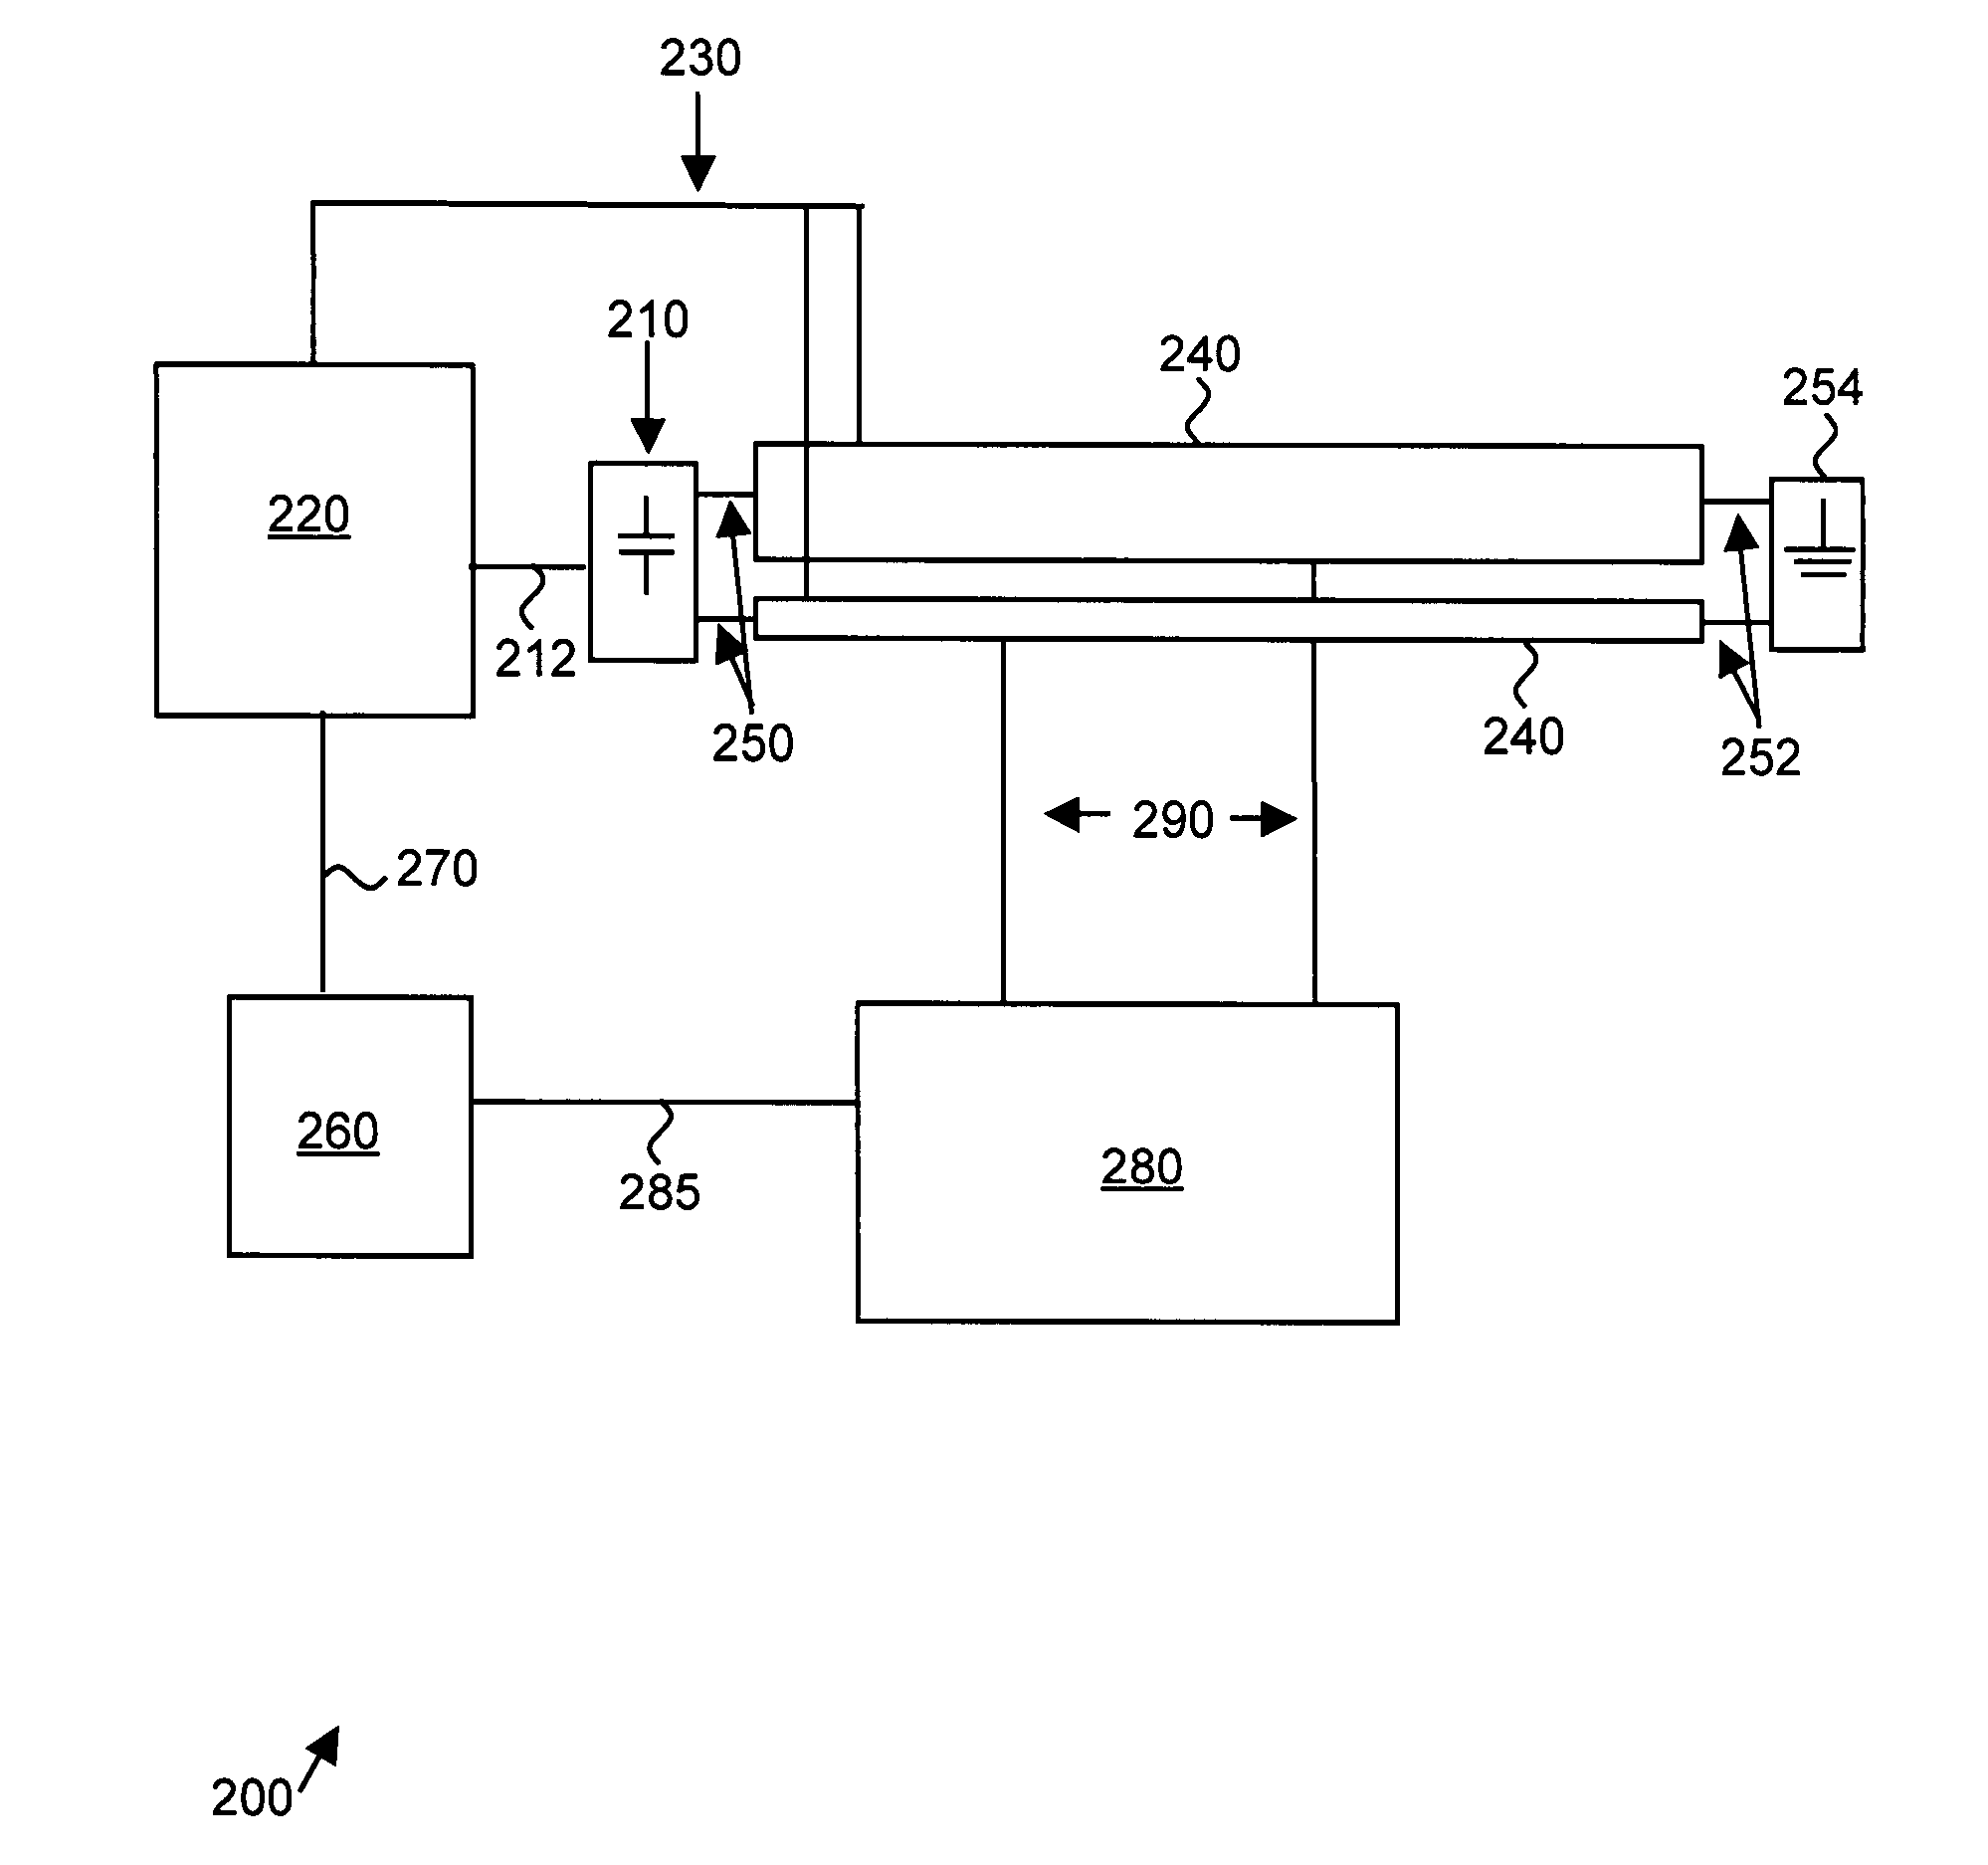 Circuit for charging a capacitor with a power source